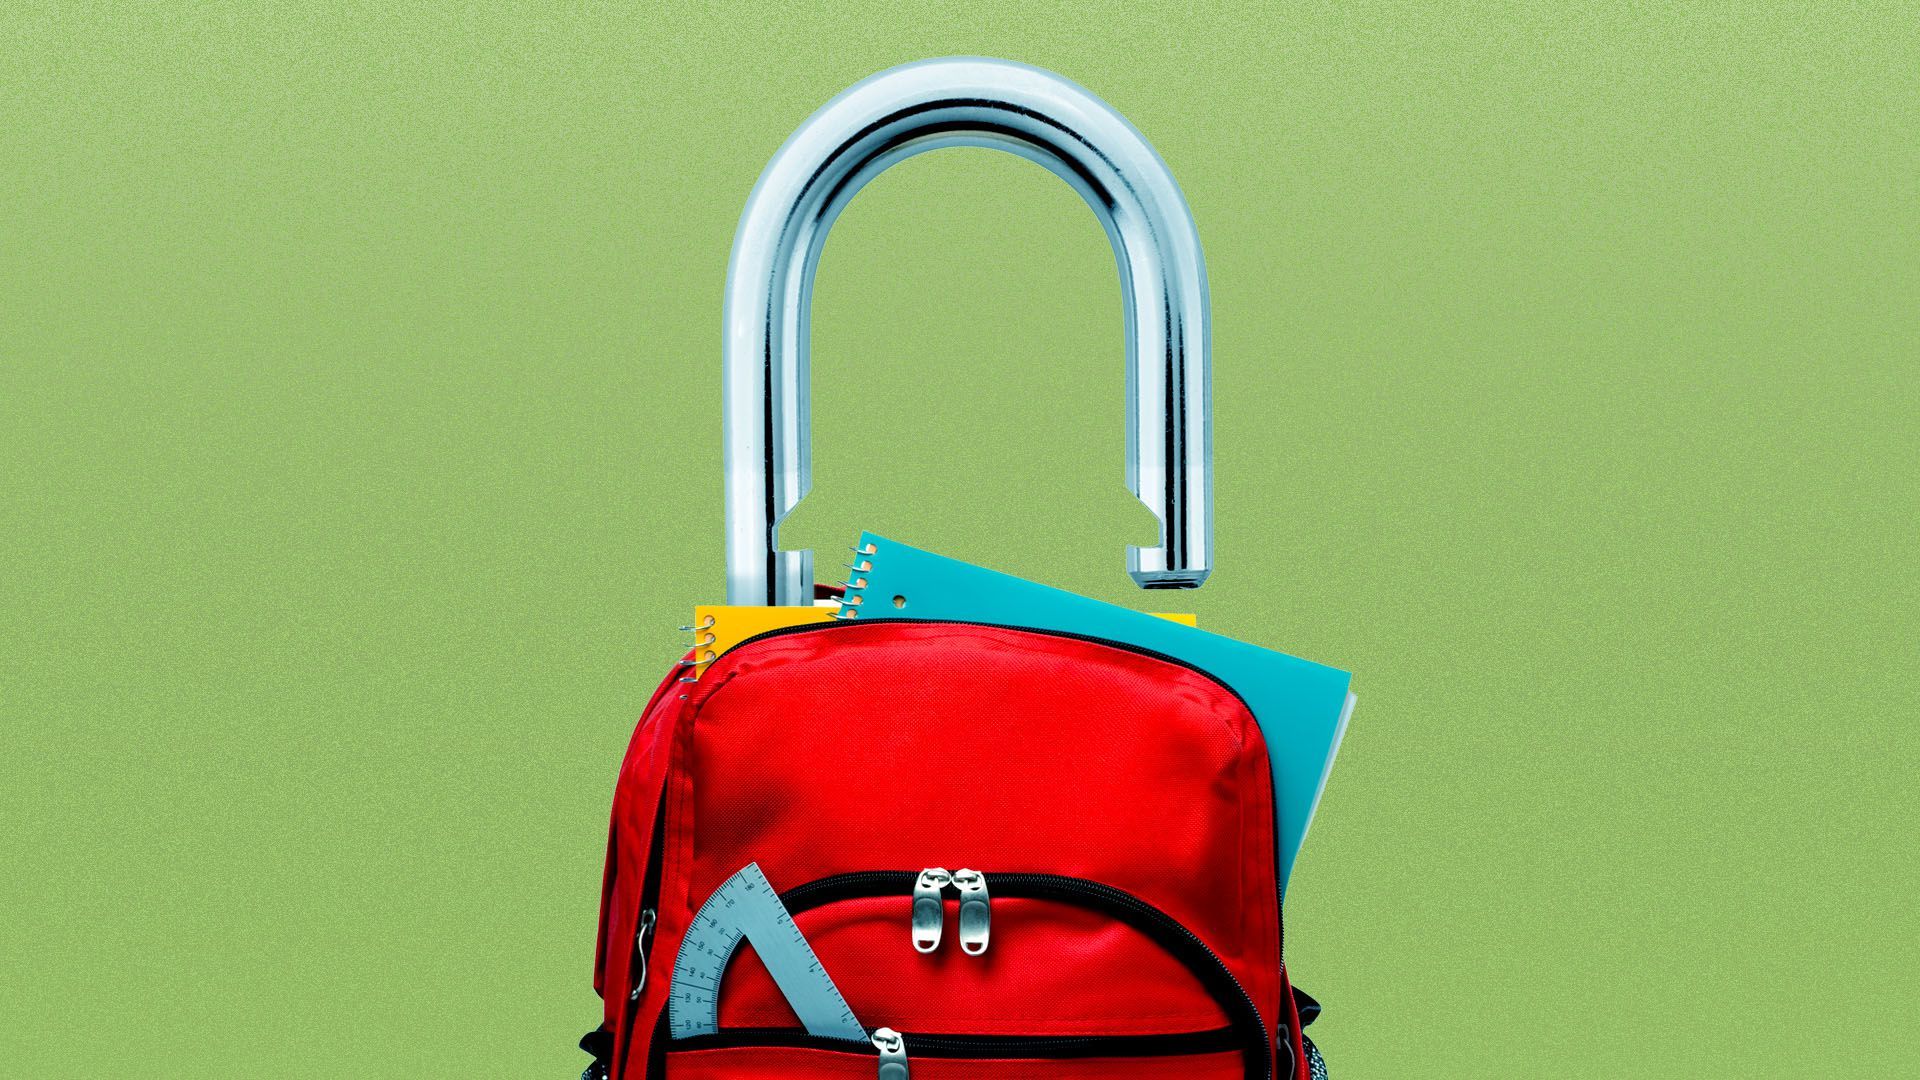 Illustration of a backpack with an open lock coming out of the top